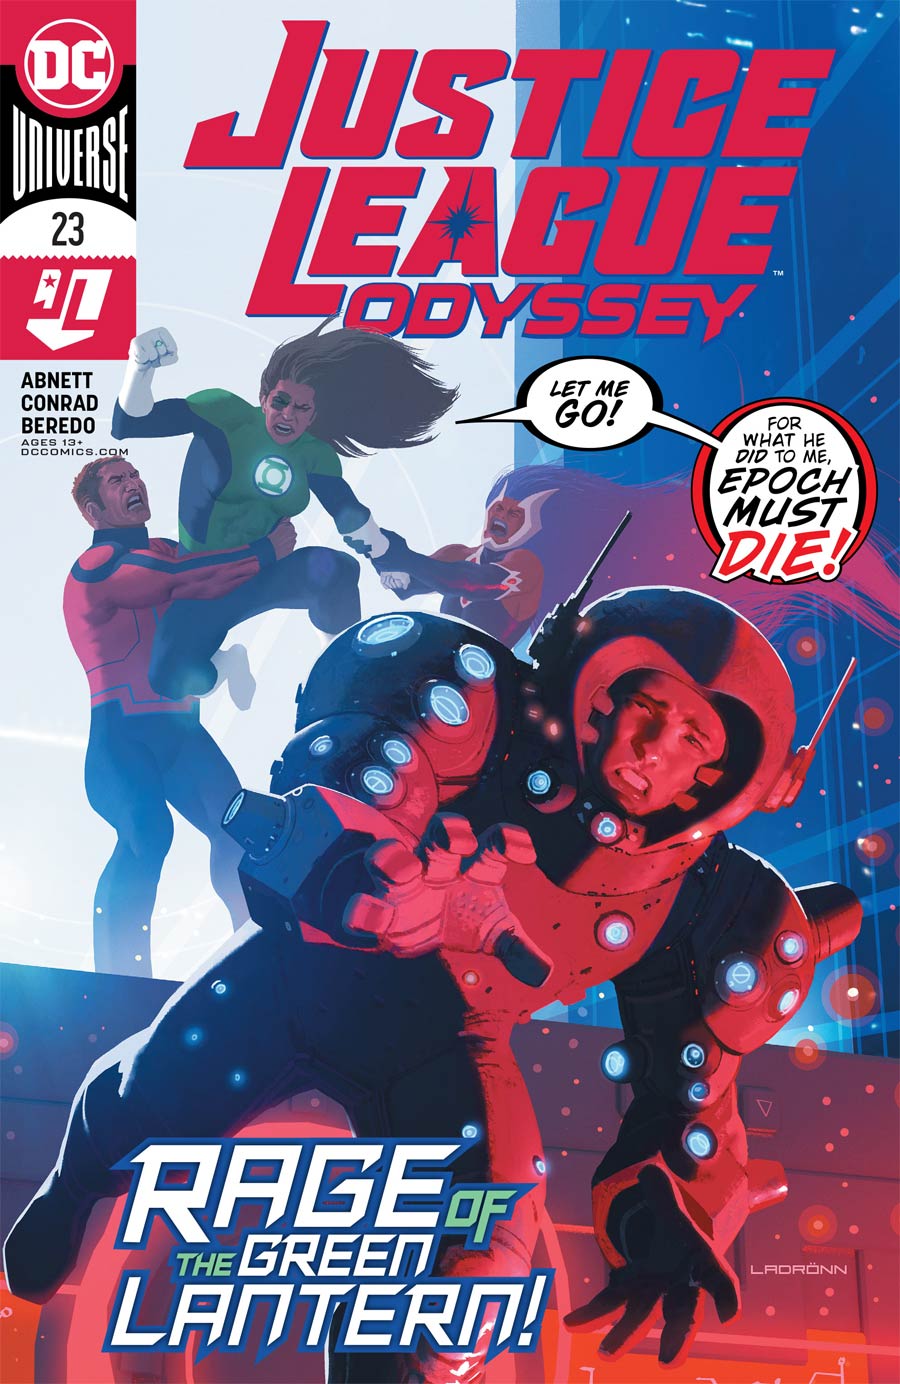 Justice League Odyssey #23 Cover A Regular Jose Ladronn Cover